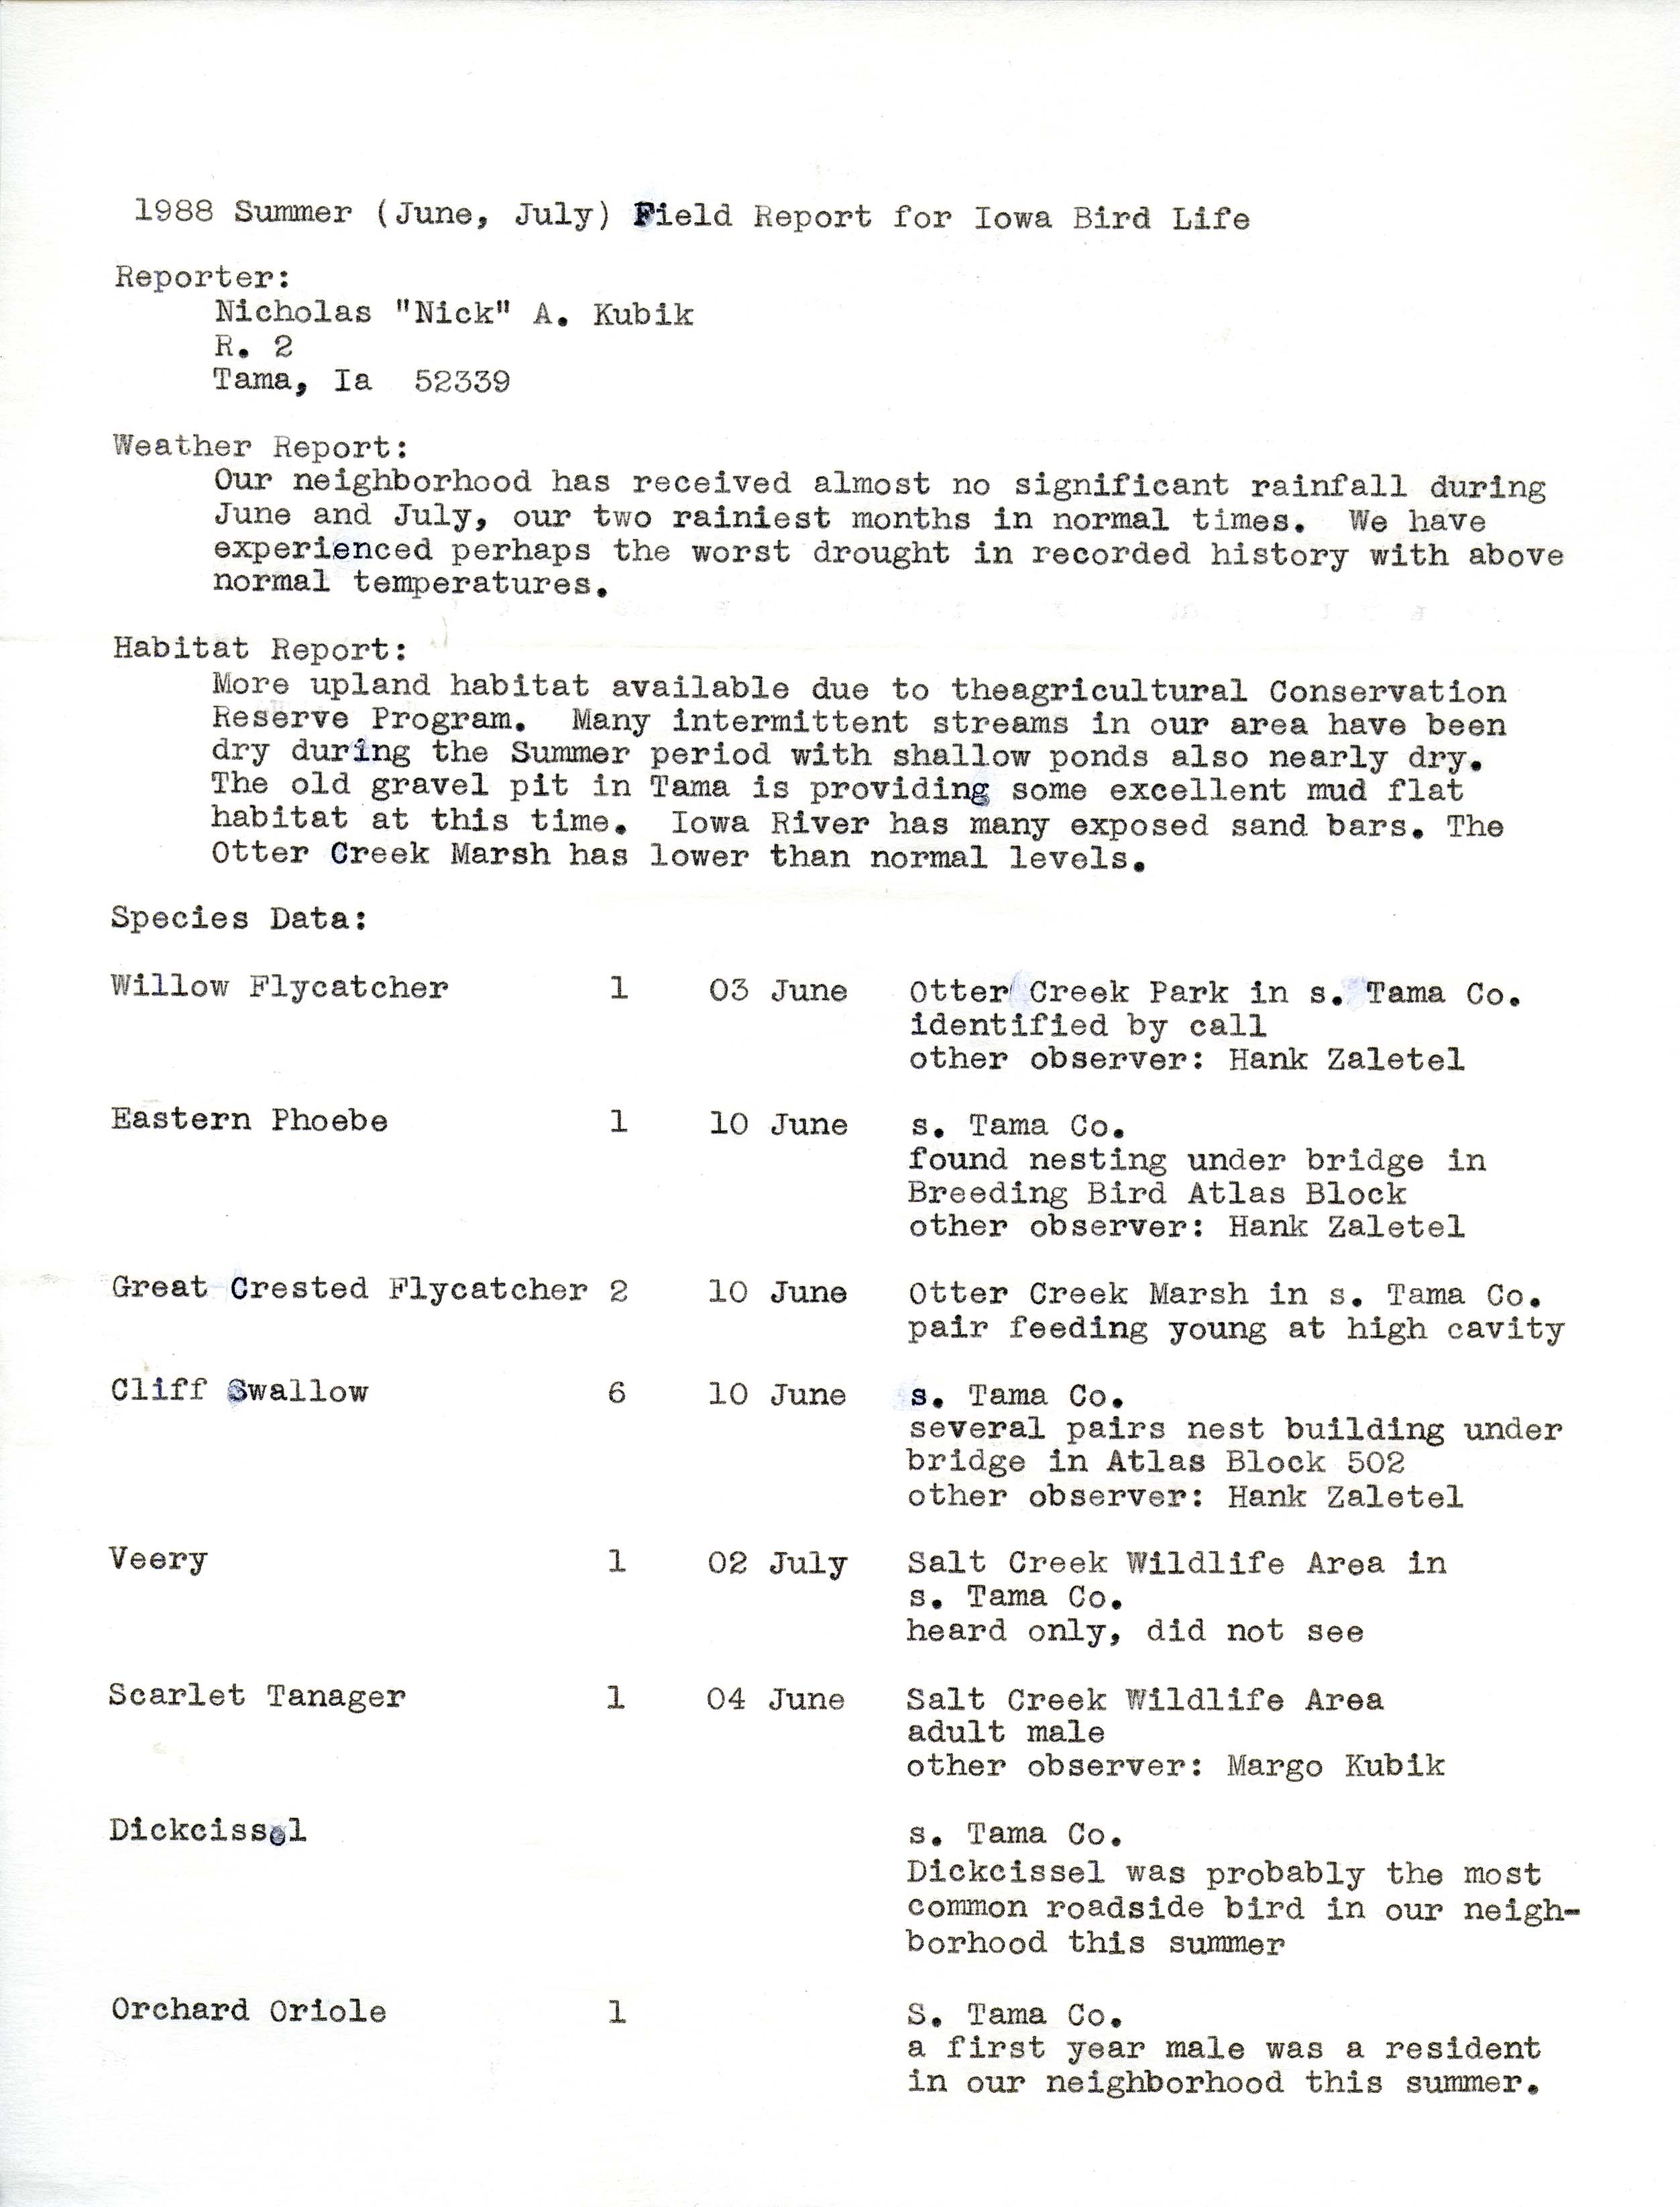 Field notes contributed by Nicholas A. Kubik, summer 1988